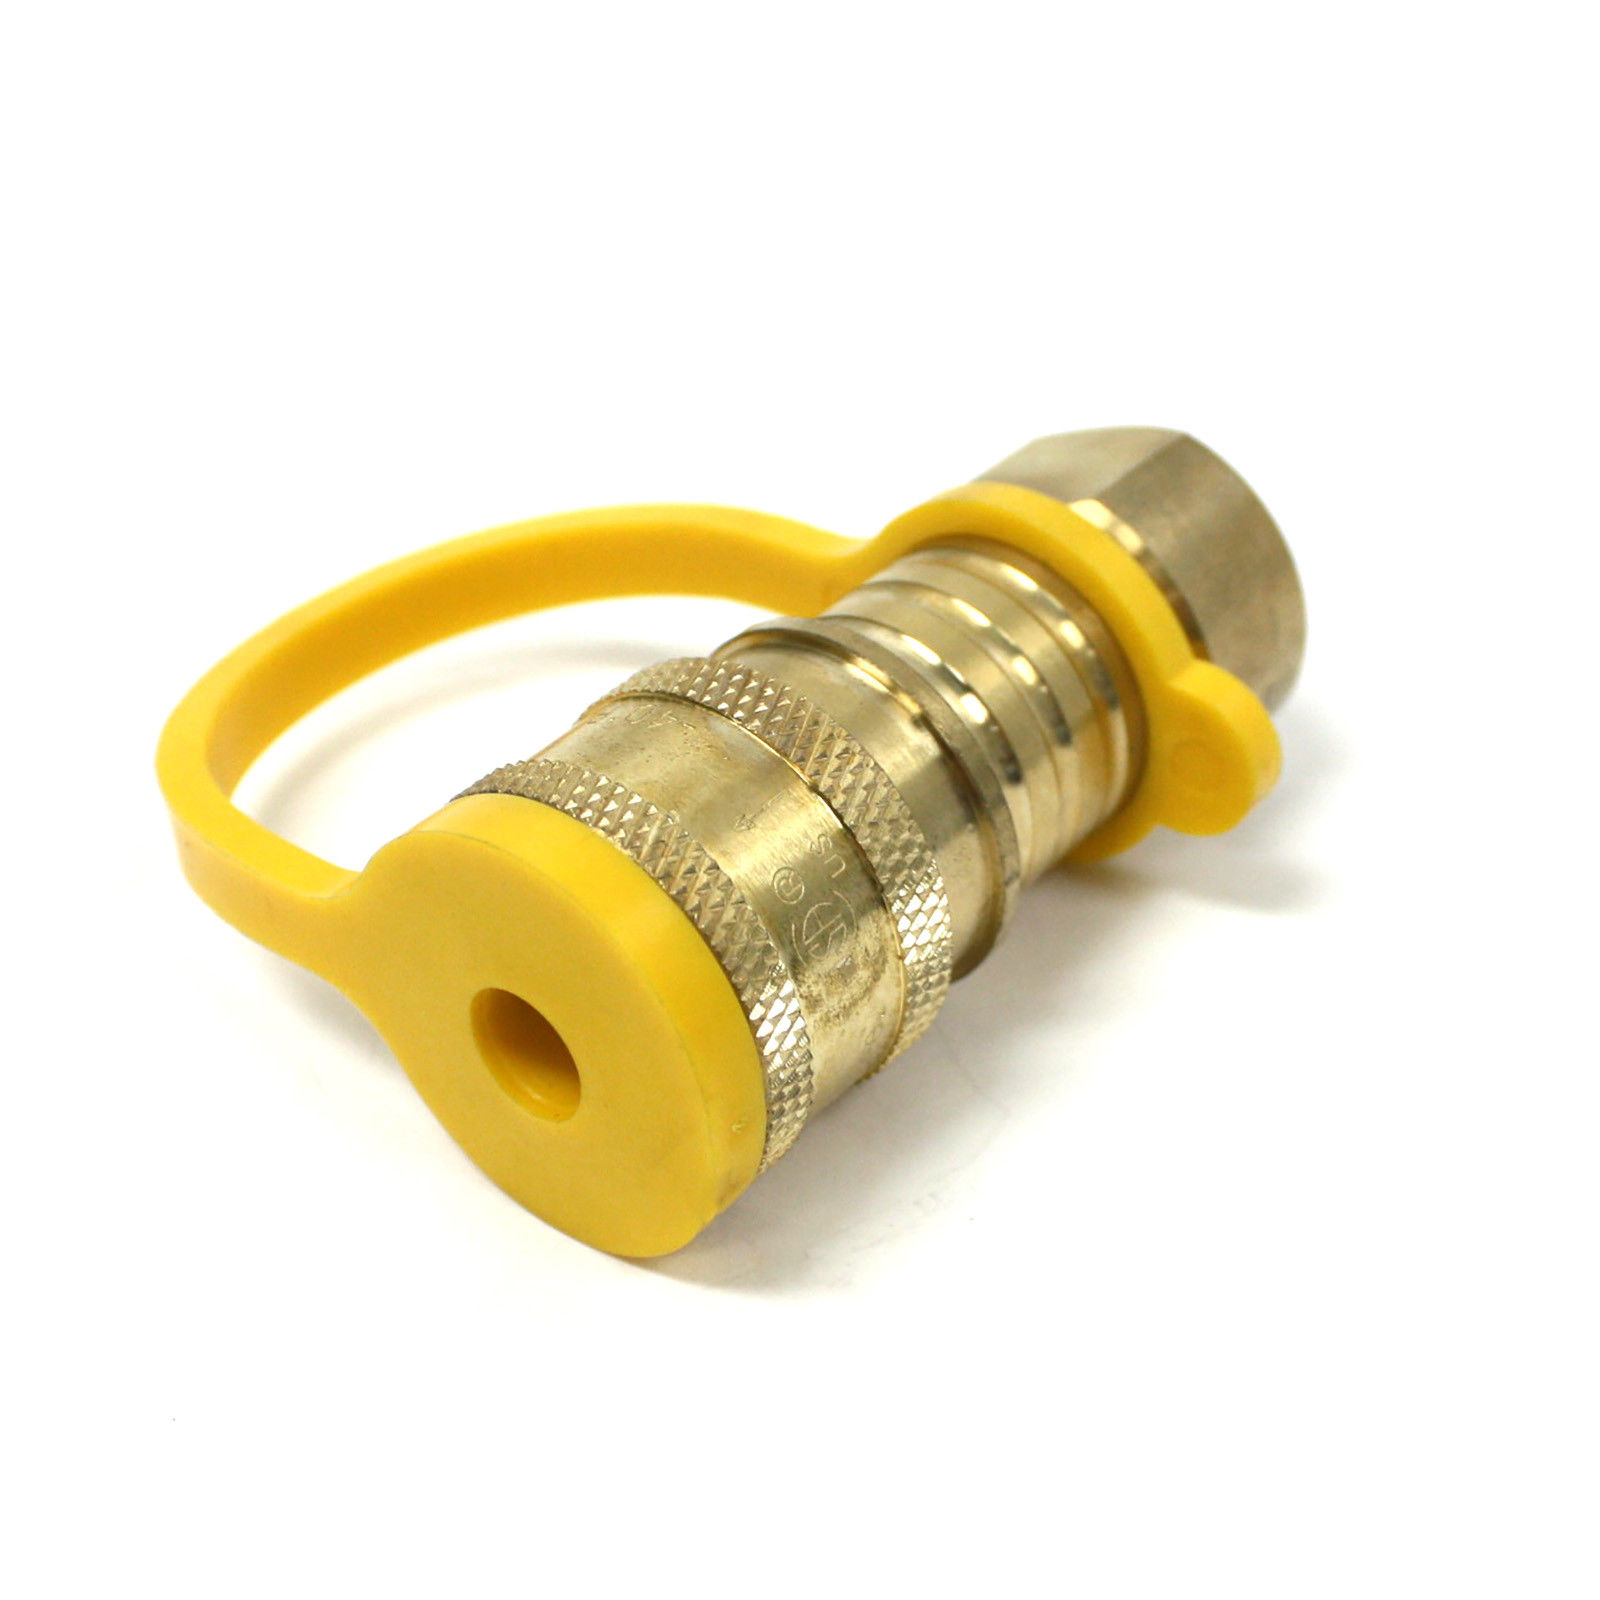 https://econosuperstore.com/wp-content/uploads/imported/2/Propane-Natural-Gas-Quick-Connect-Adapter-Kit-38-Male-Pipe-to-38-Female-Kit-352428059932-7.JPG